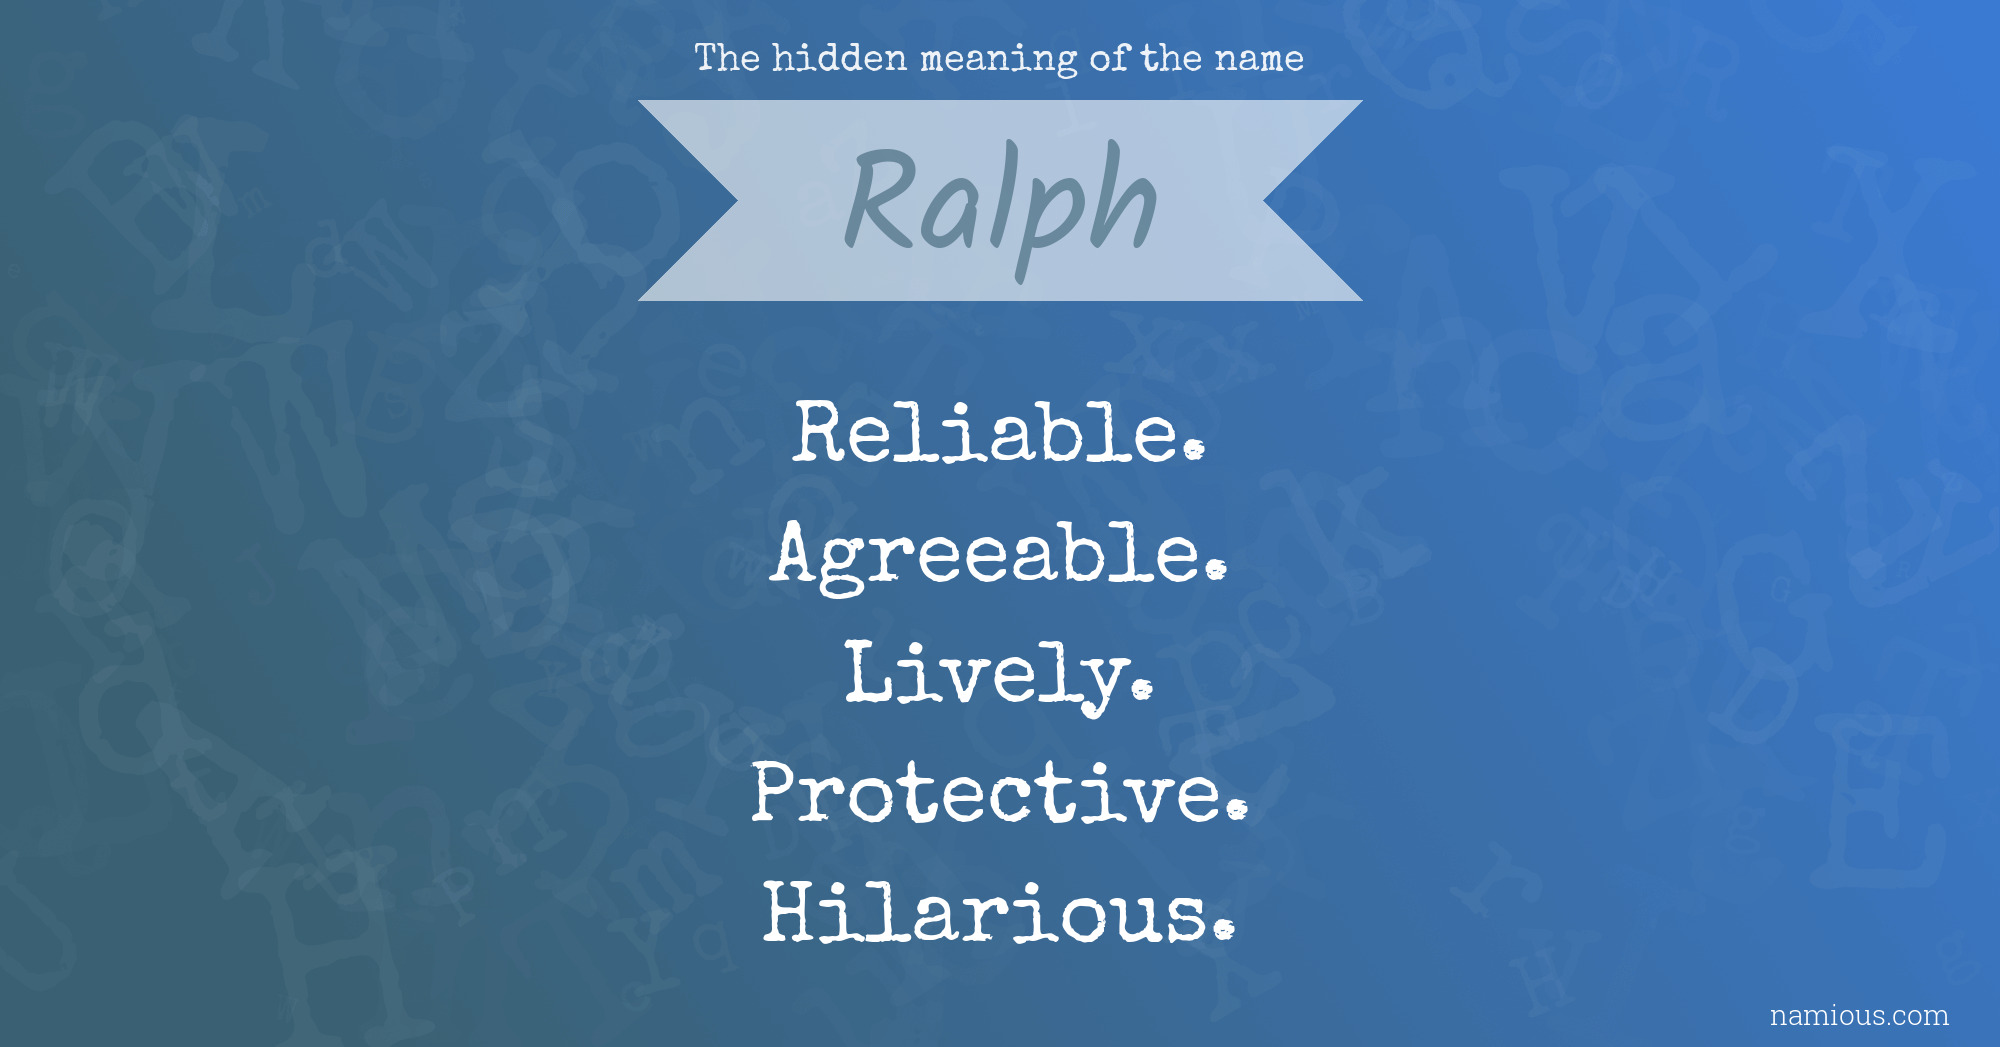 The hidden meaning of the name Ralph